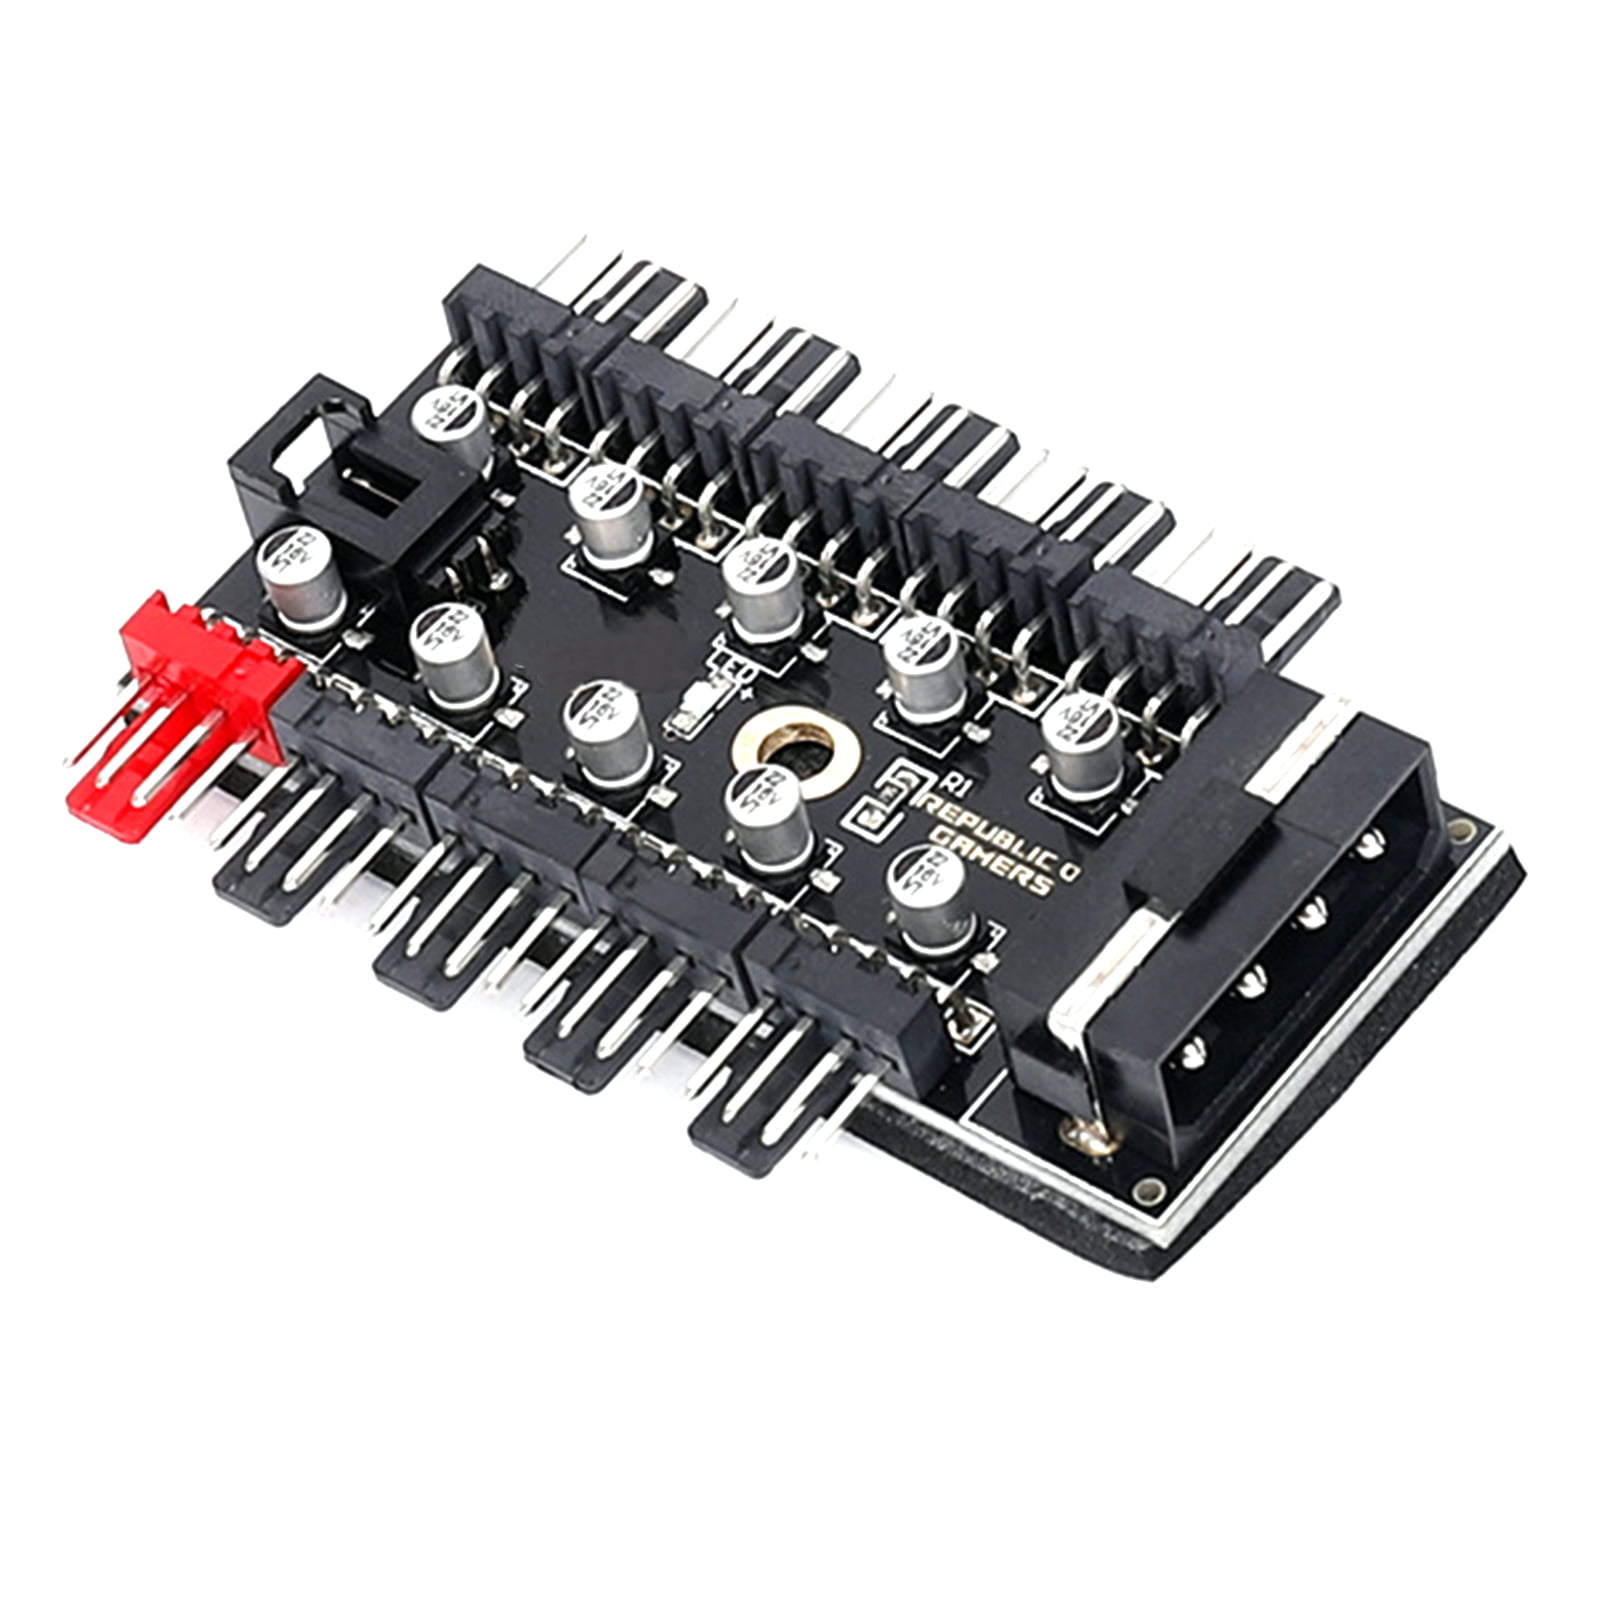 Programmable LED Thermal Fan Controller 2-2A 4Pin Molex